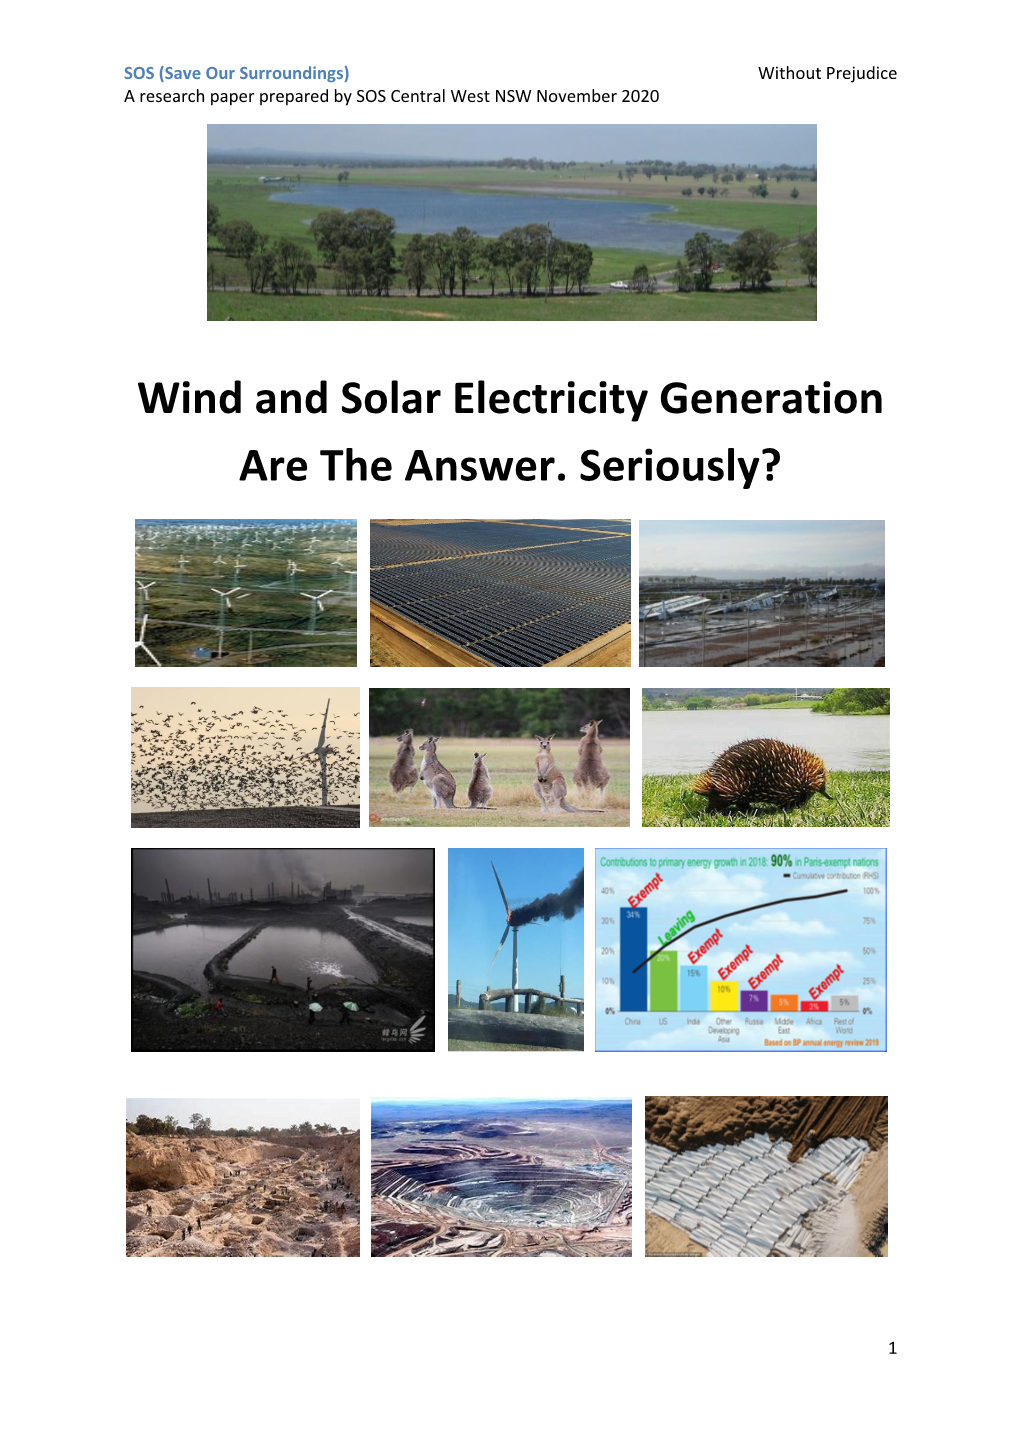 Wind and Solar Electricity Generation Are the Answer. Seriously?